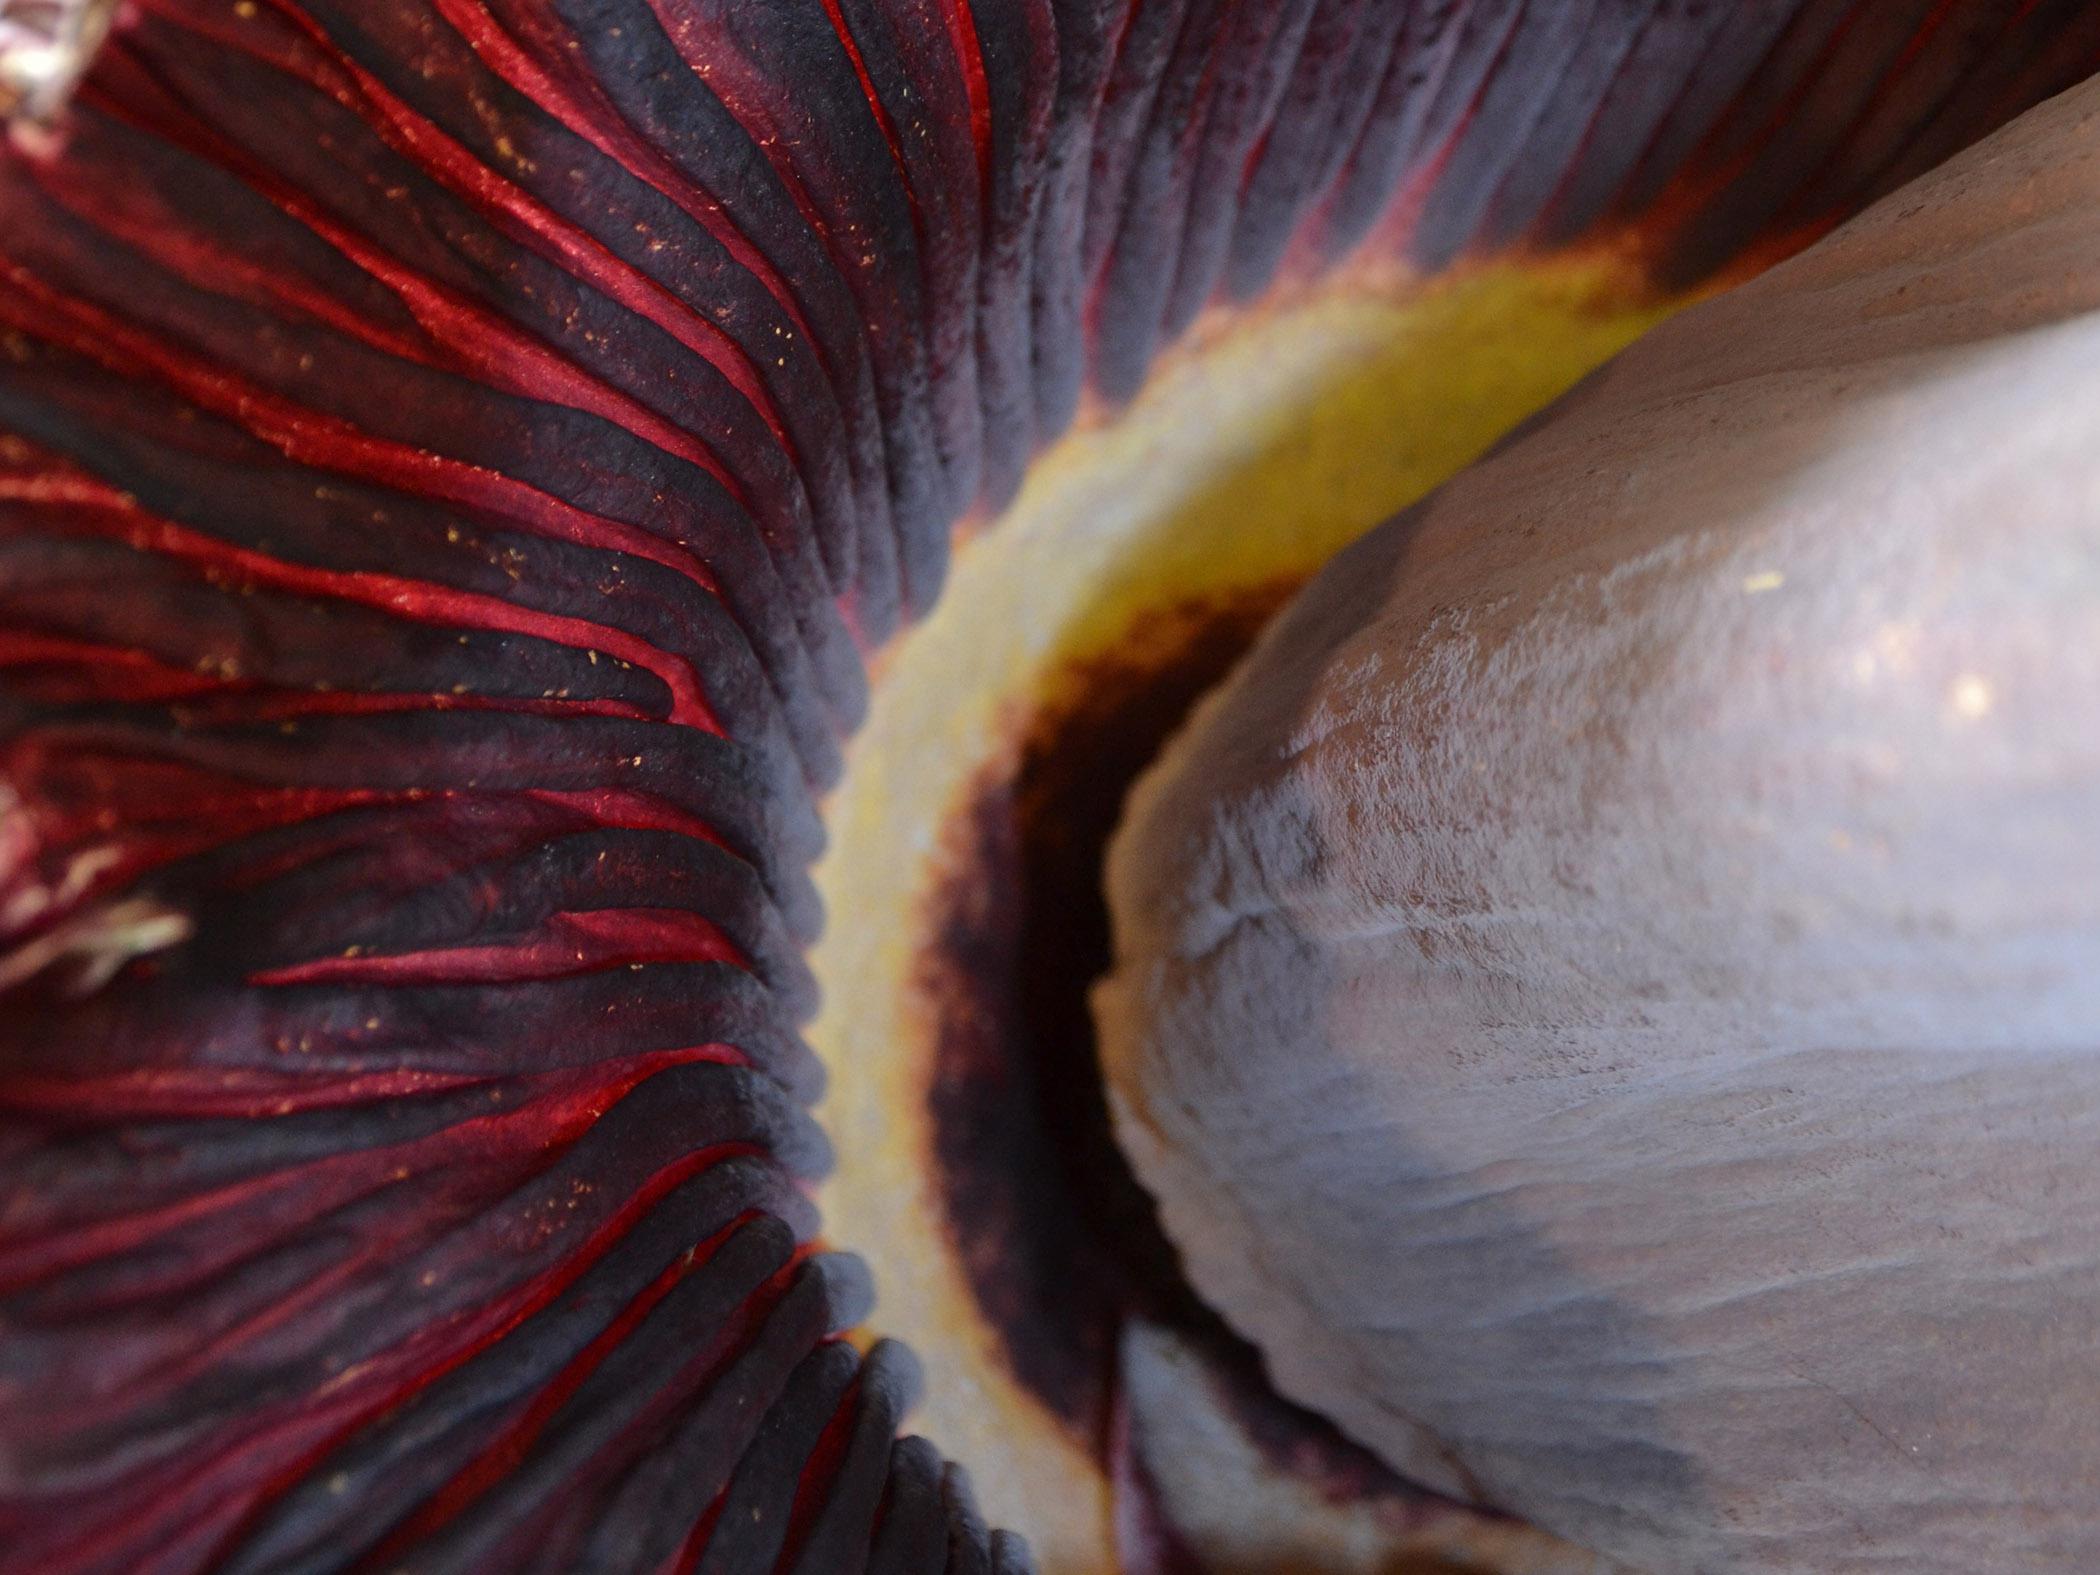 The titan arum’s spathe opens for one day every seven to 10 years. The leafy, petal-like structure, which contains both male and female flowers, emits a strong odor similar to decaying meat to attract the plant’s native pollinators. (Photo by MSU Extension Service/Susan Collins-Smith)